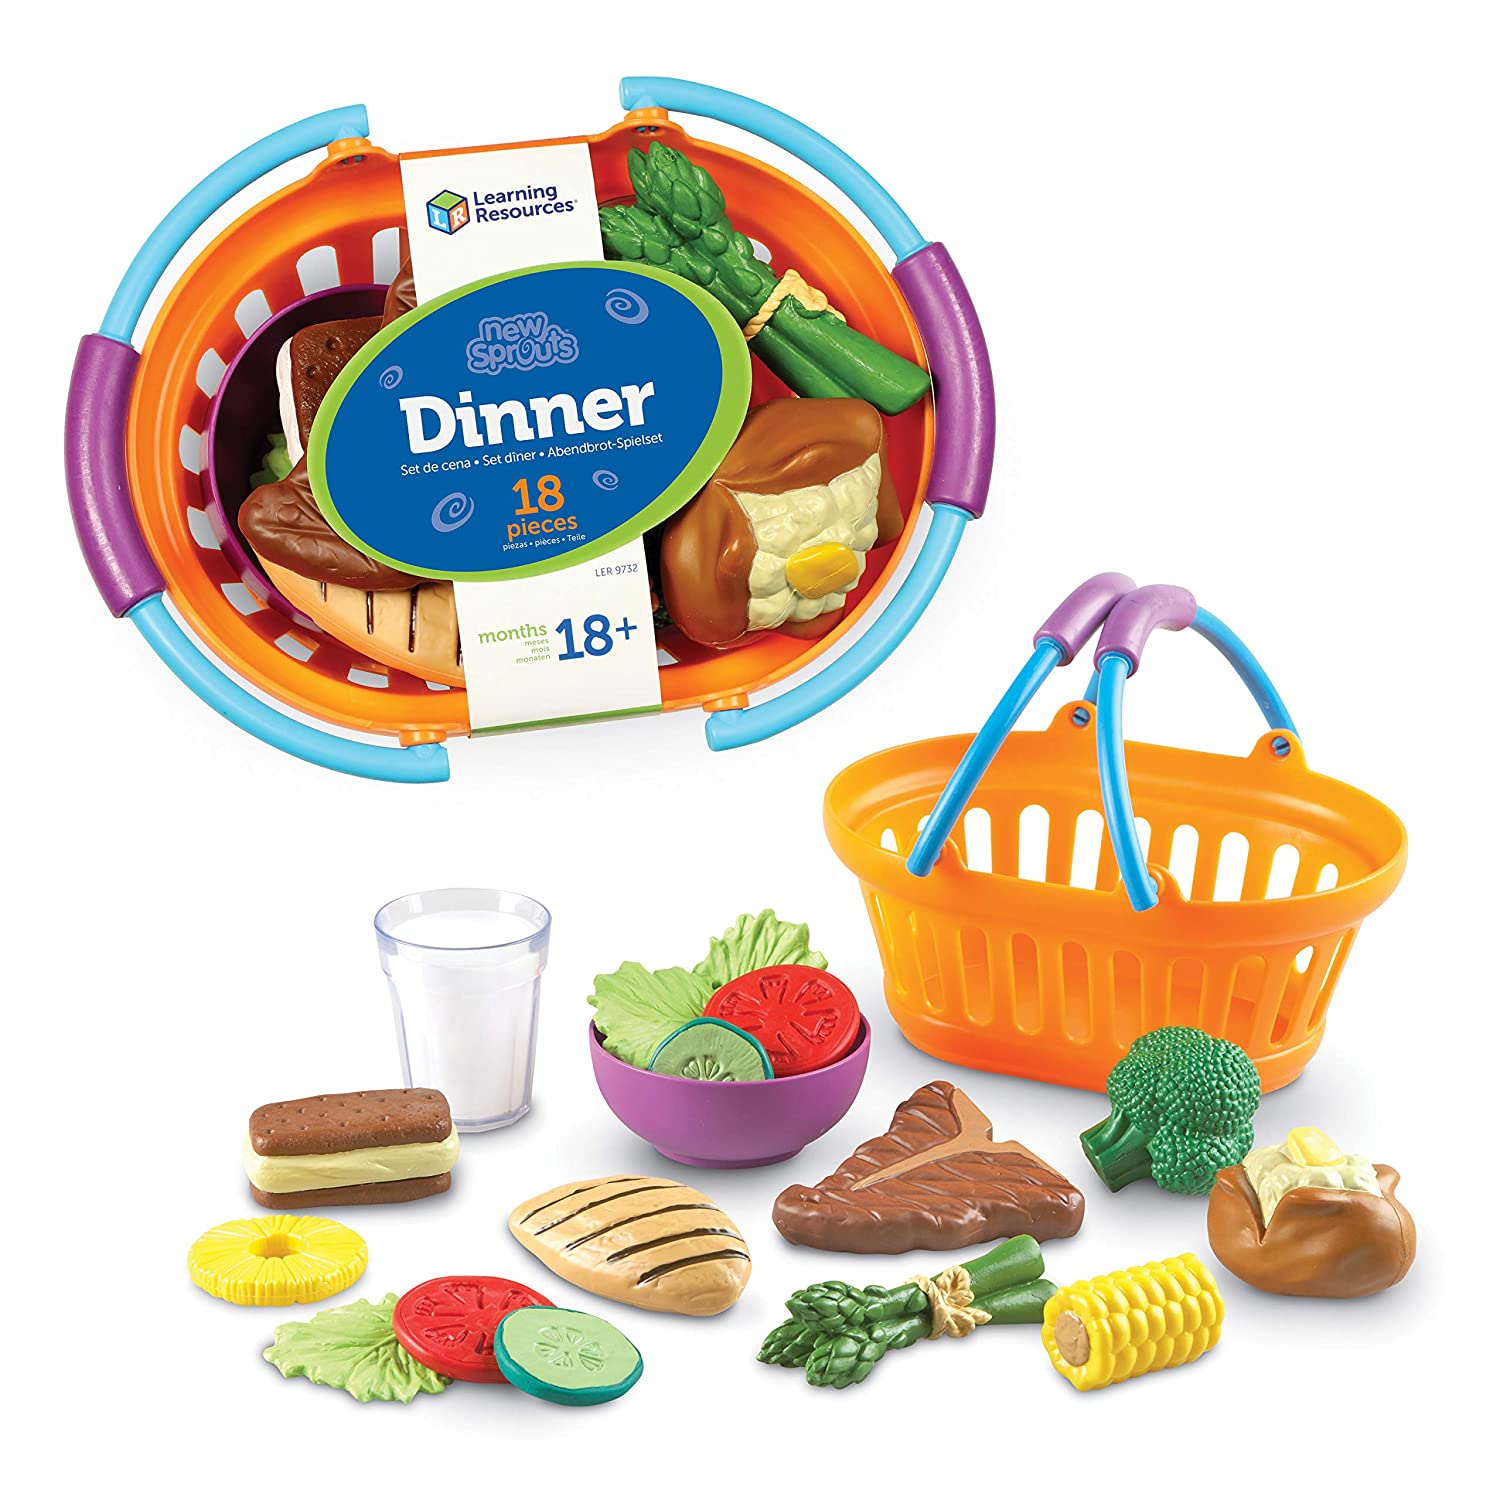 Learning Resources New Sprouts Dinner Foods Basket, Pretend Play Food For Toddlers, Dinner Food Toys for Kids, 18 Pieces, Ages 18 mos+